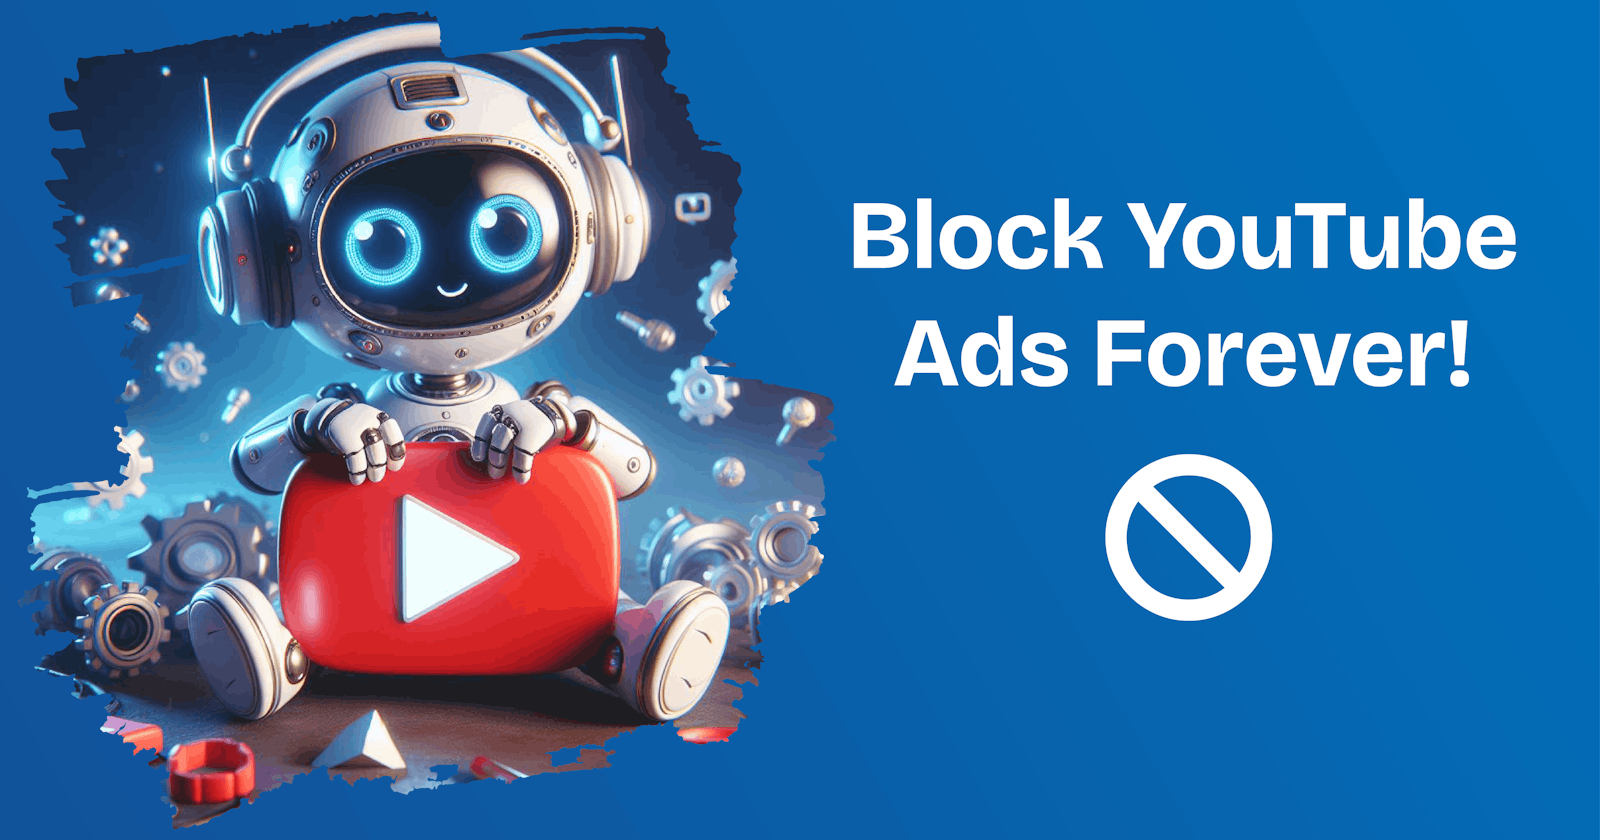 Block YouTube Ads Once and For All